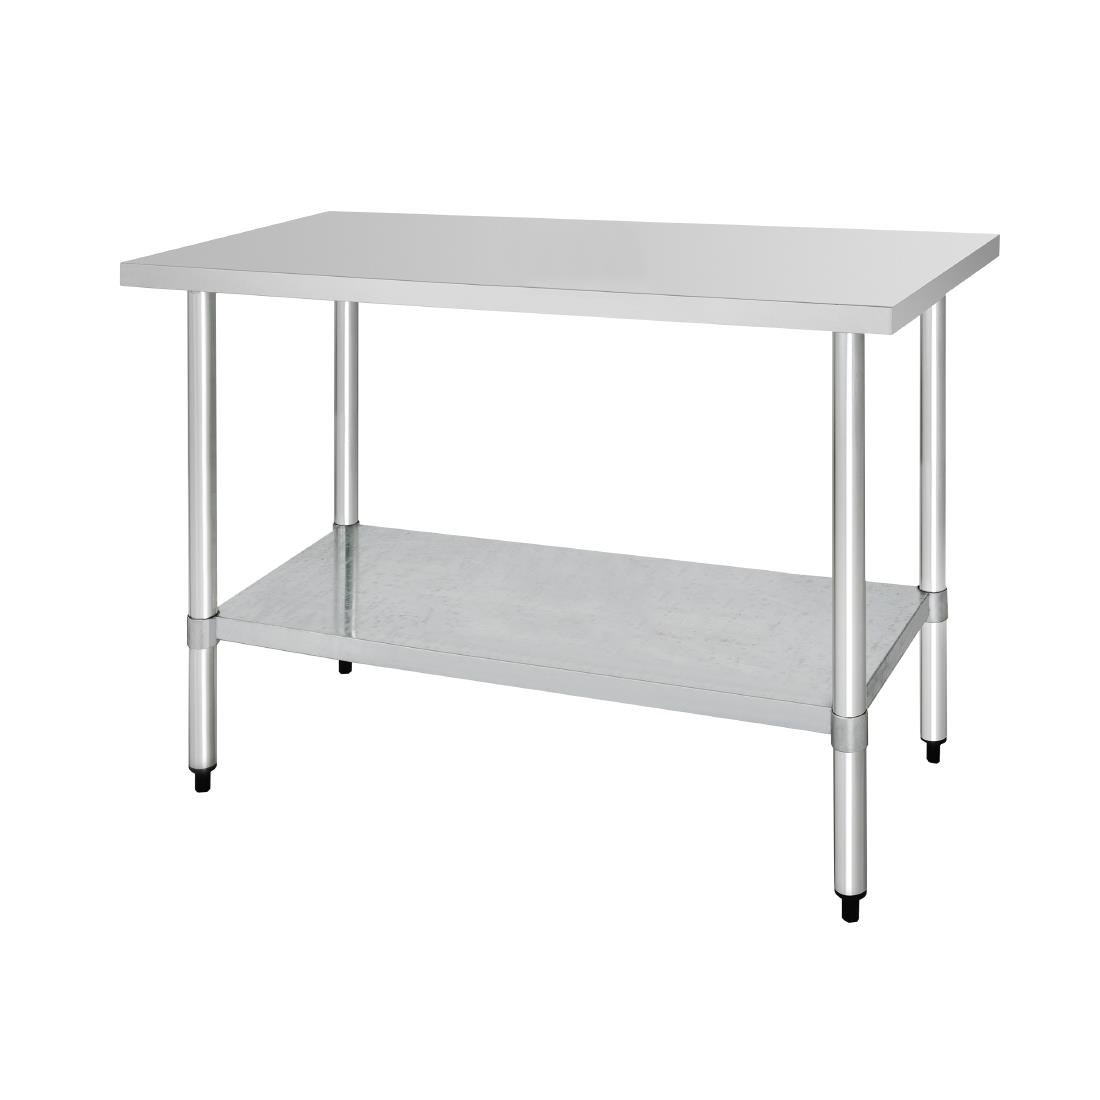 Vogue Stainless Steel Prep Table 1800mm (900(H) x 1800(W) x 600(D)mm)